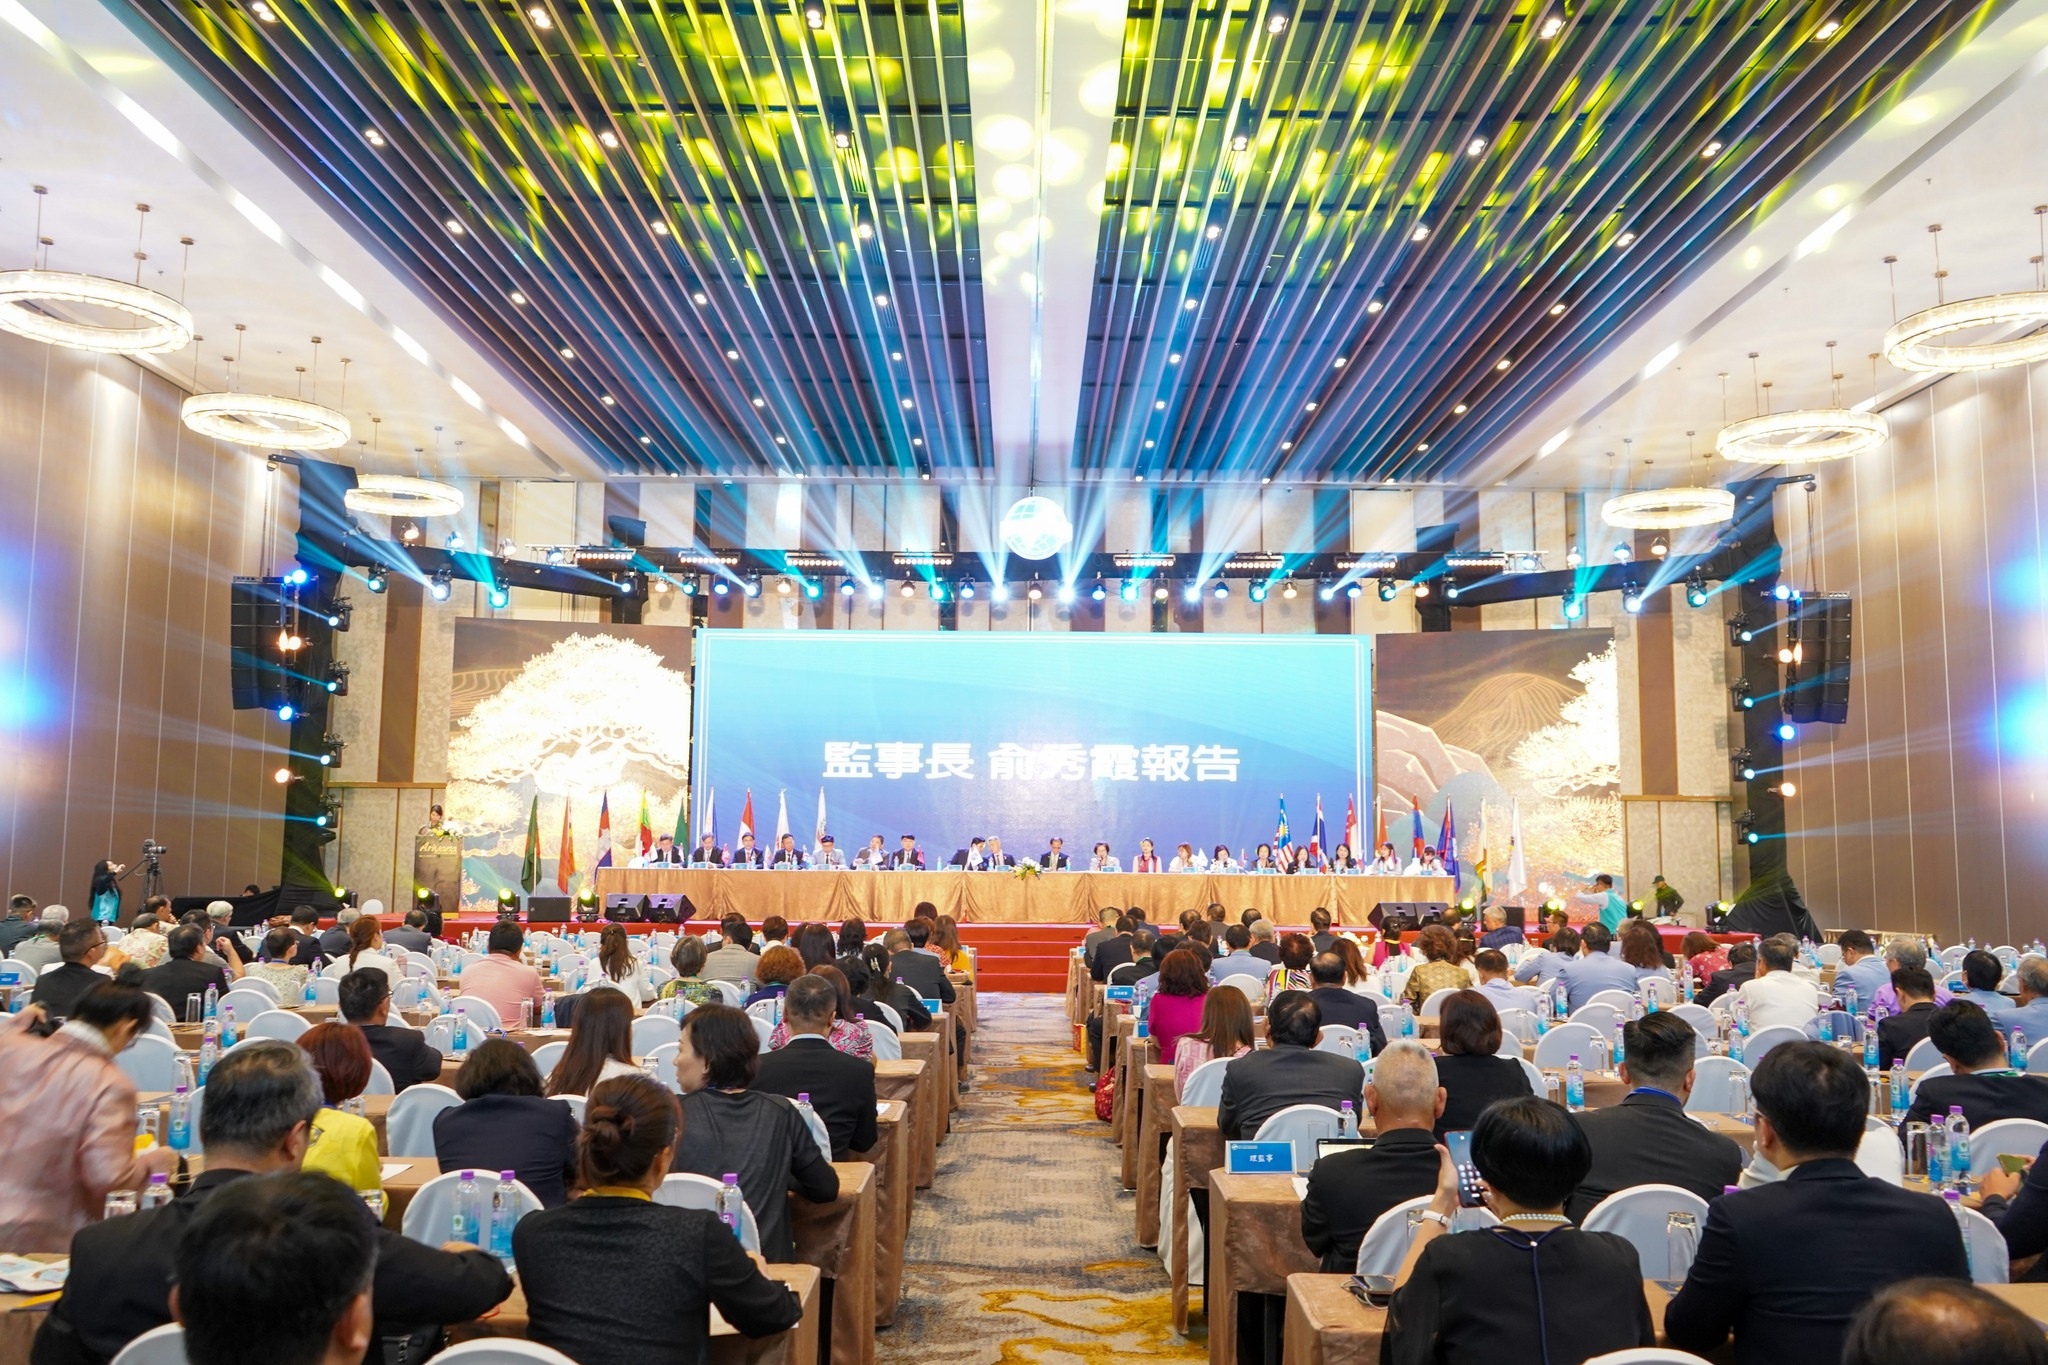 THE 31ST DANANG CONFERENCE OF ASIAN TAIWAN CHAMBER OF COMMERCE